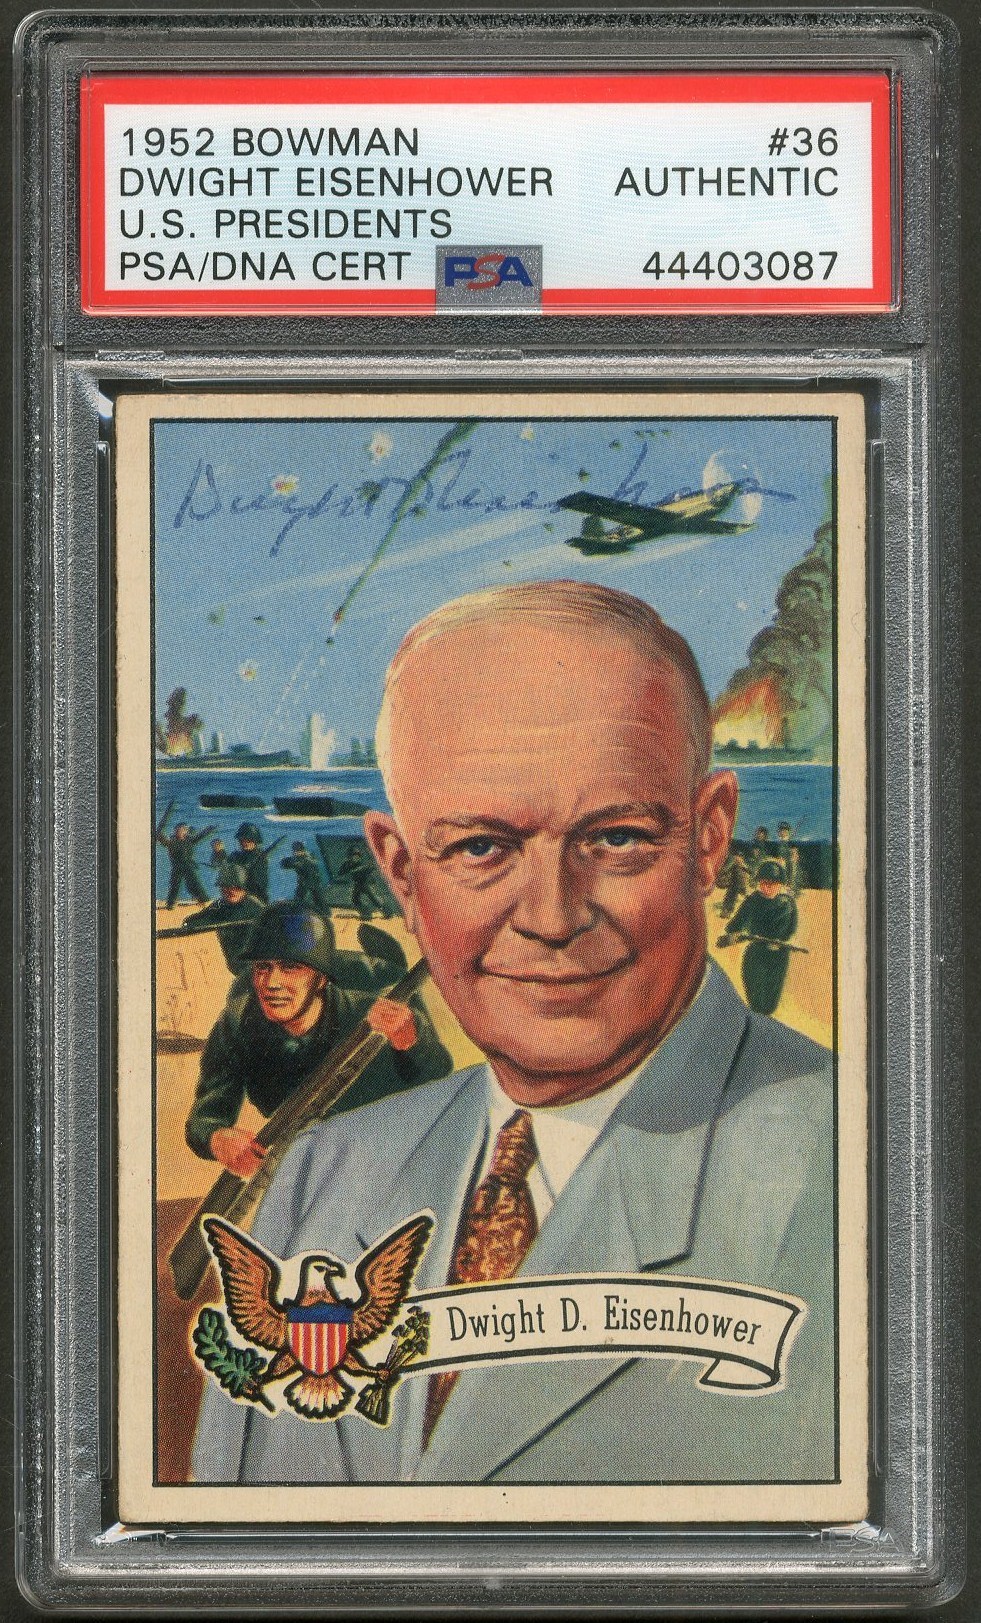 Non Sports Cards - 1952 Bowman U.S Presidents #36 Dwight Eisenhower Signed - Only One Known (PSA)